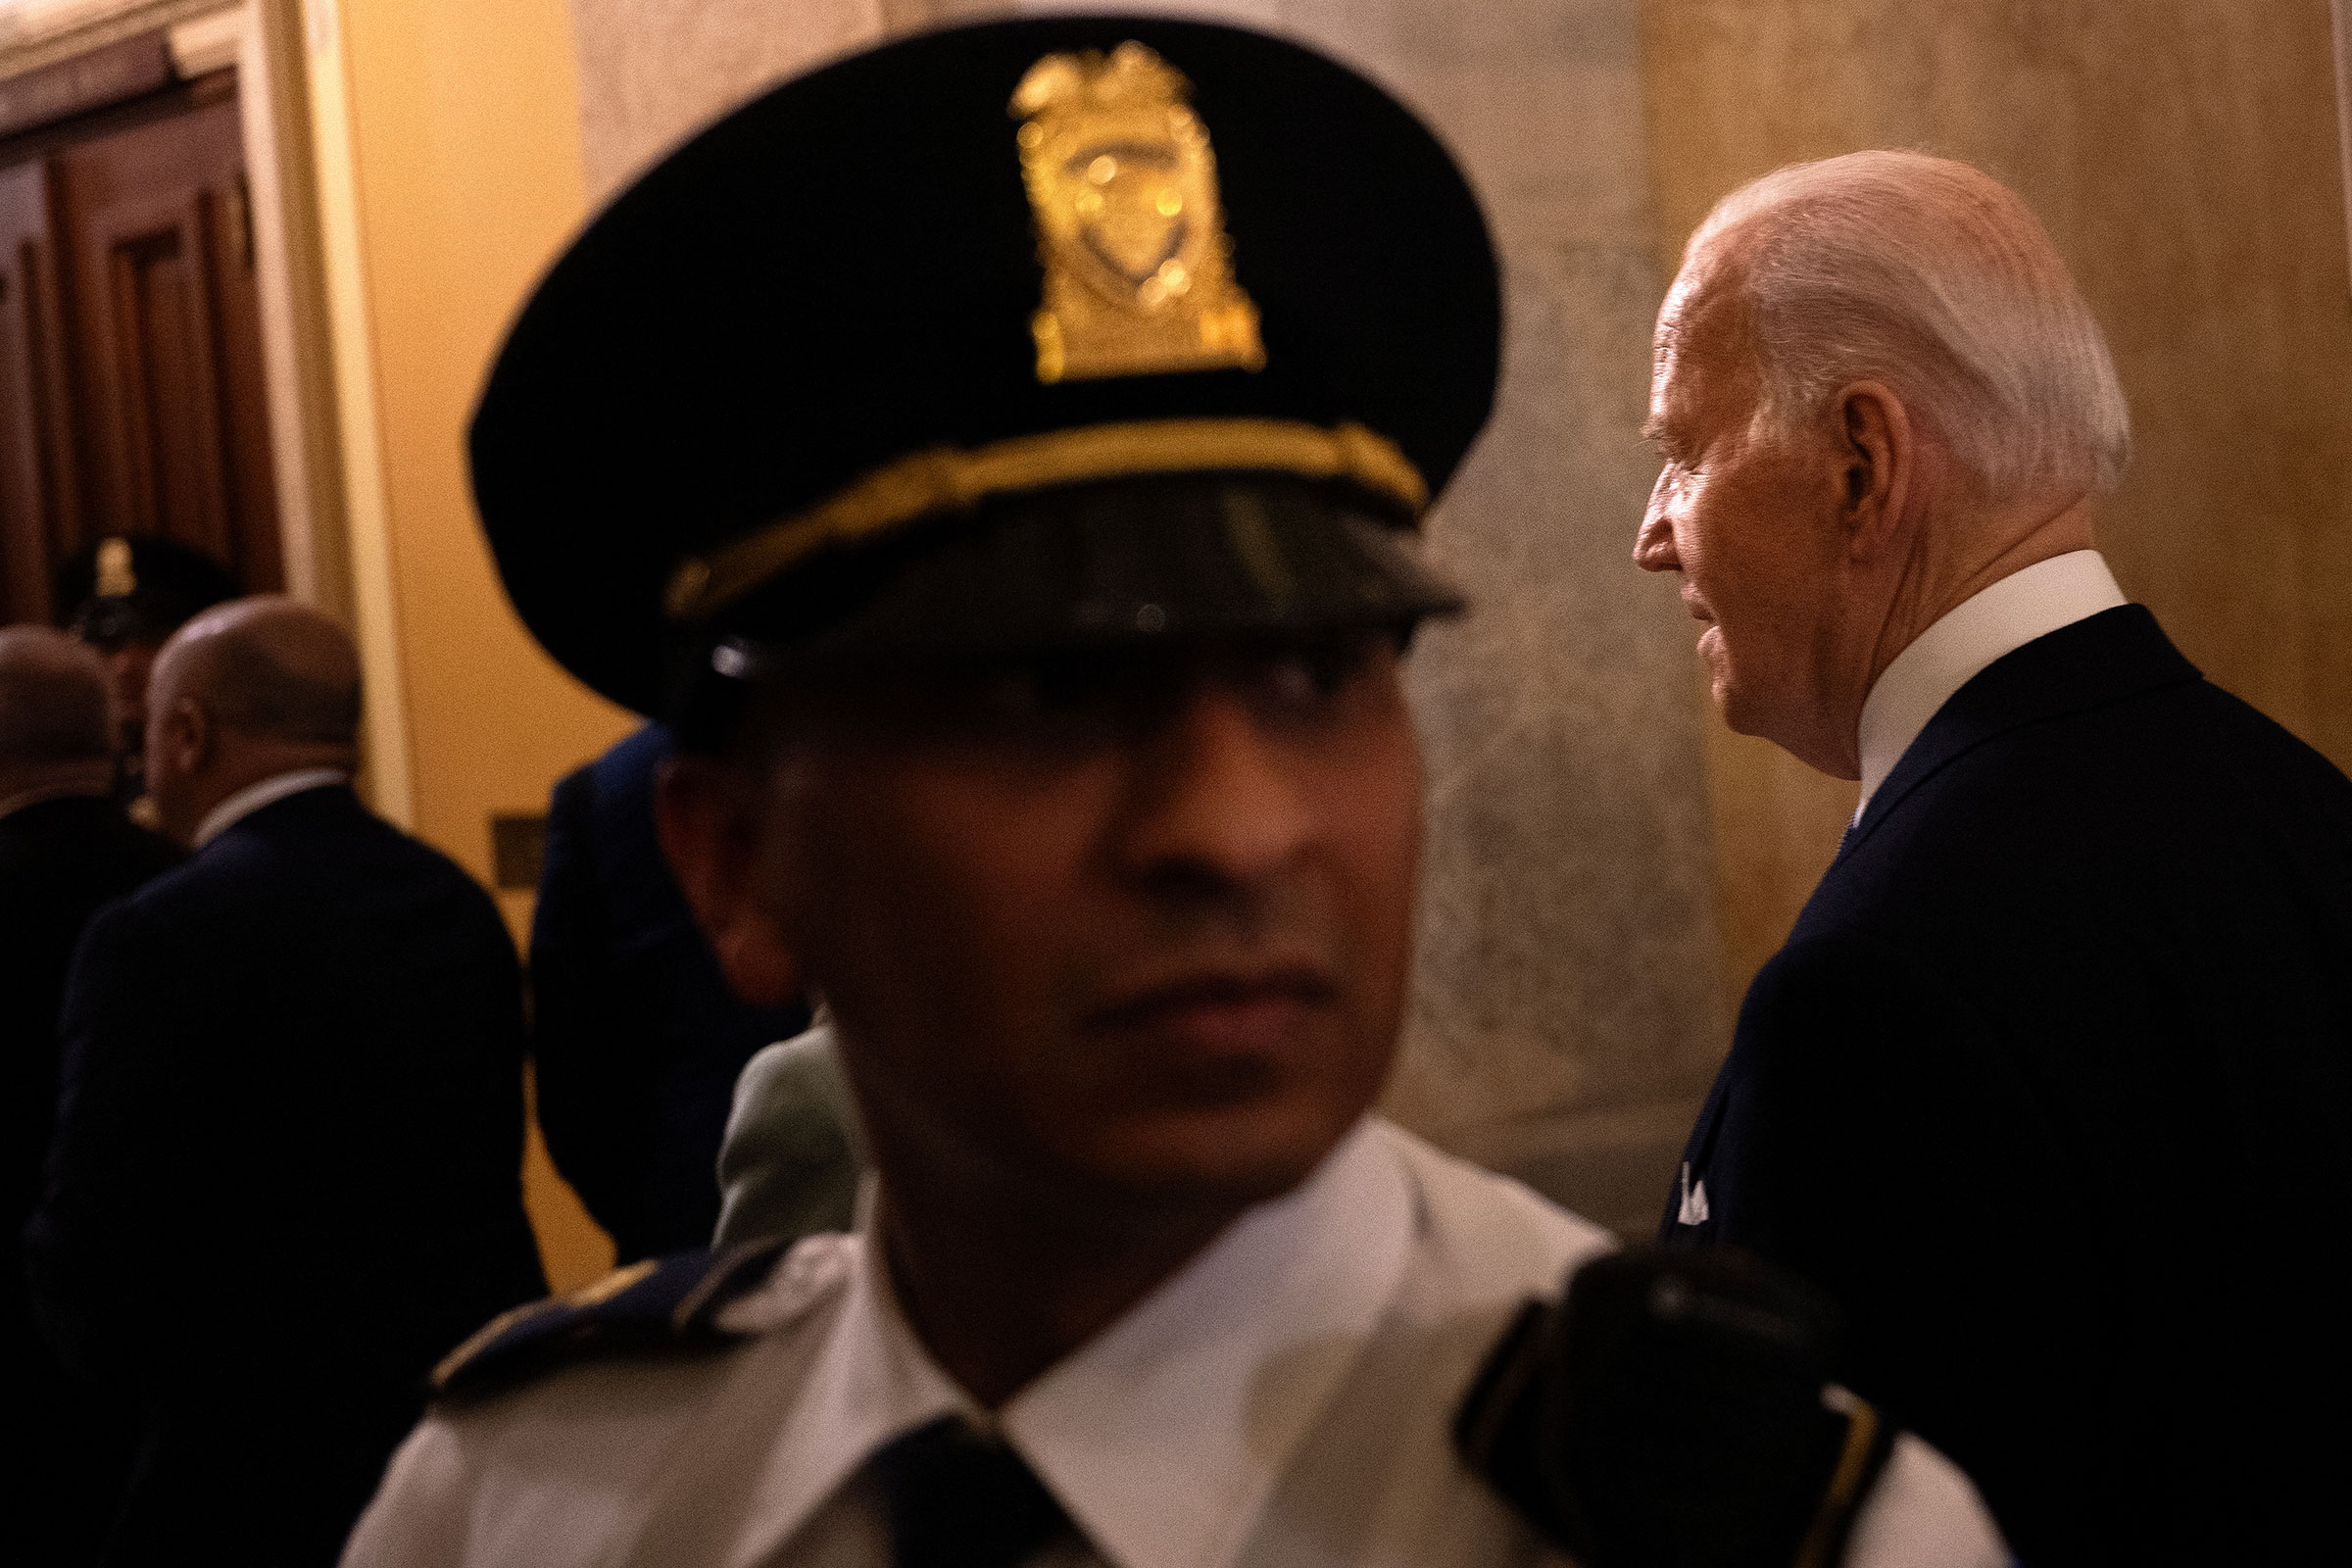 Biden’s motorcade took "the long way" to the Capitol, avoiding a large